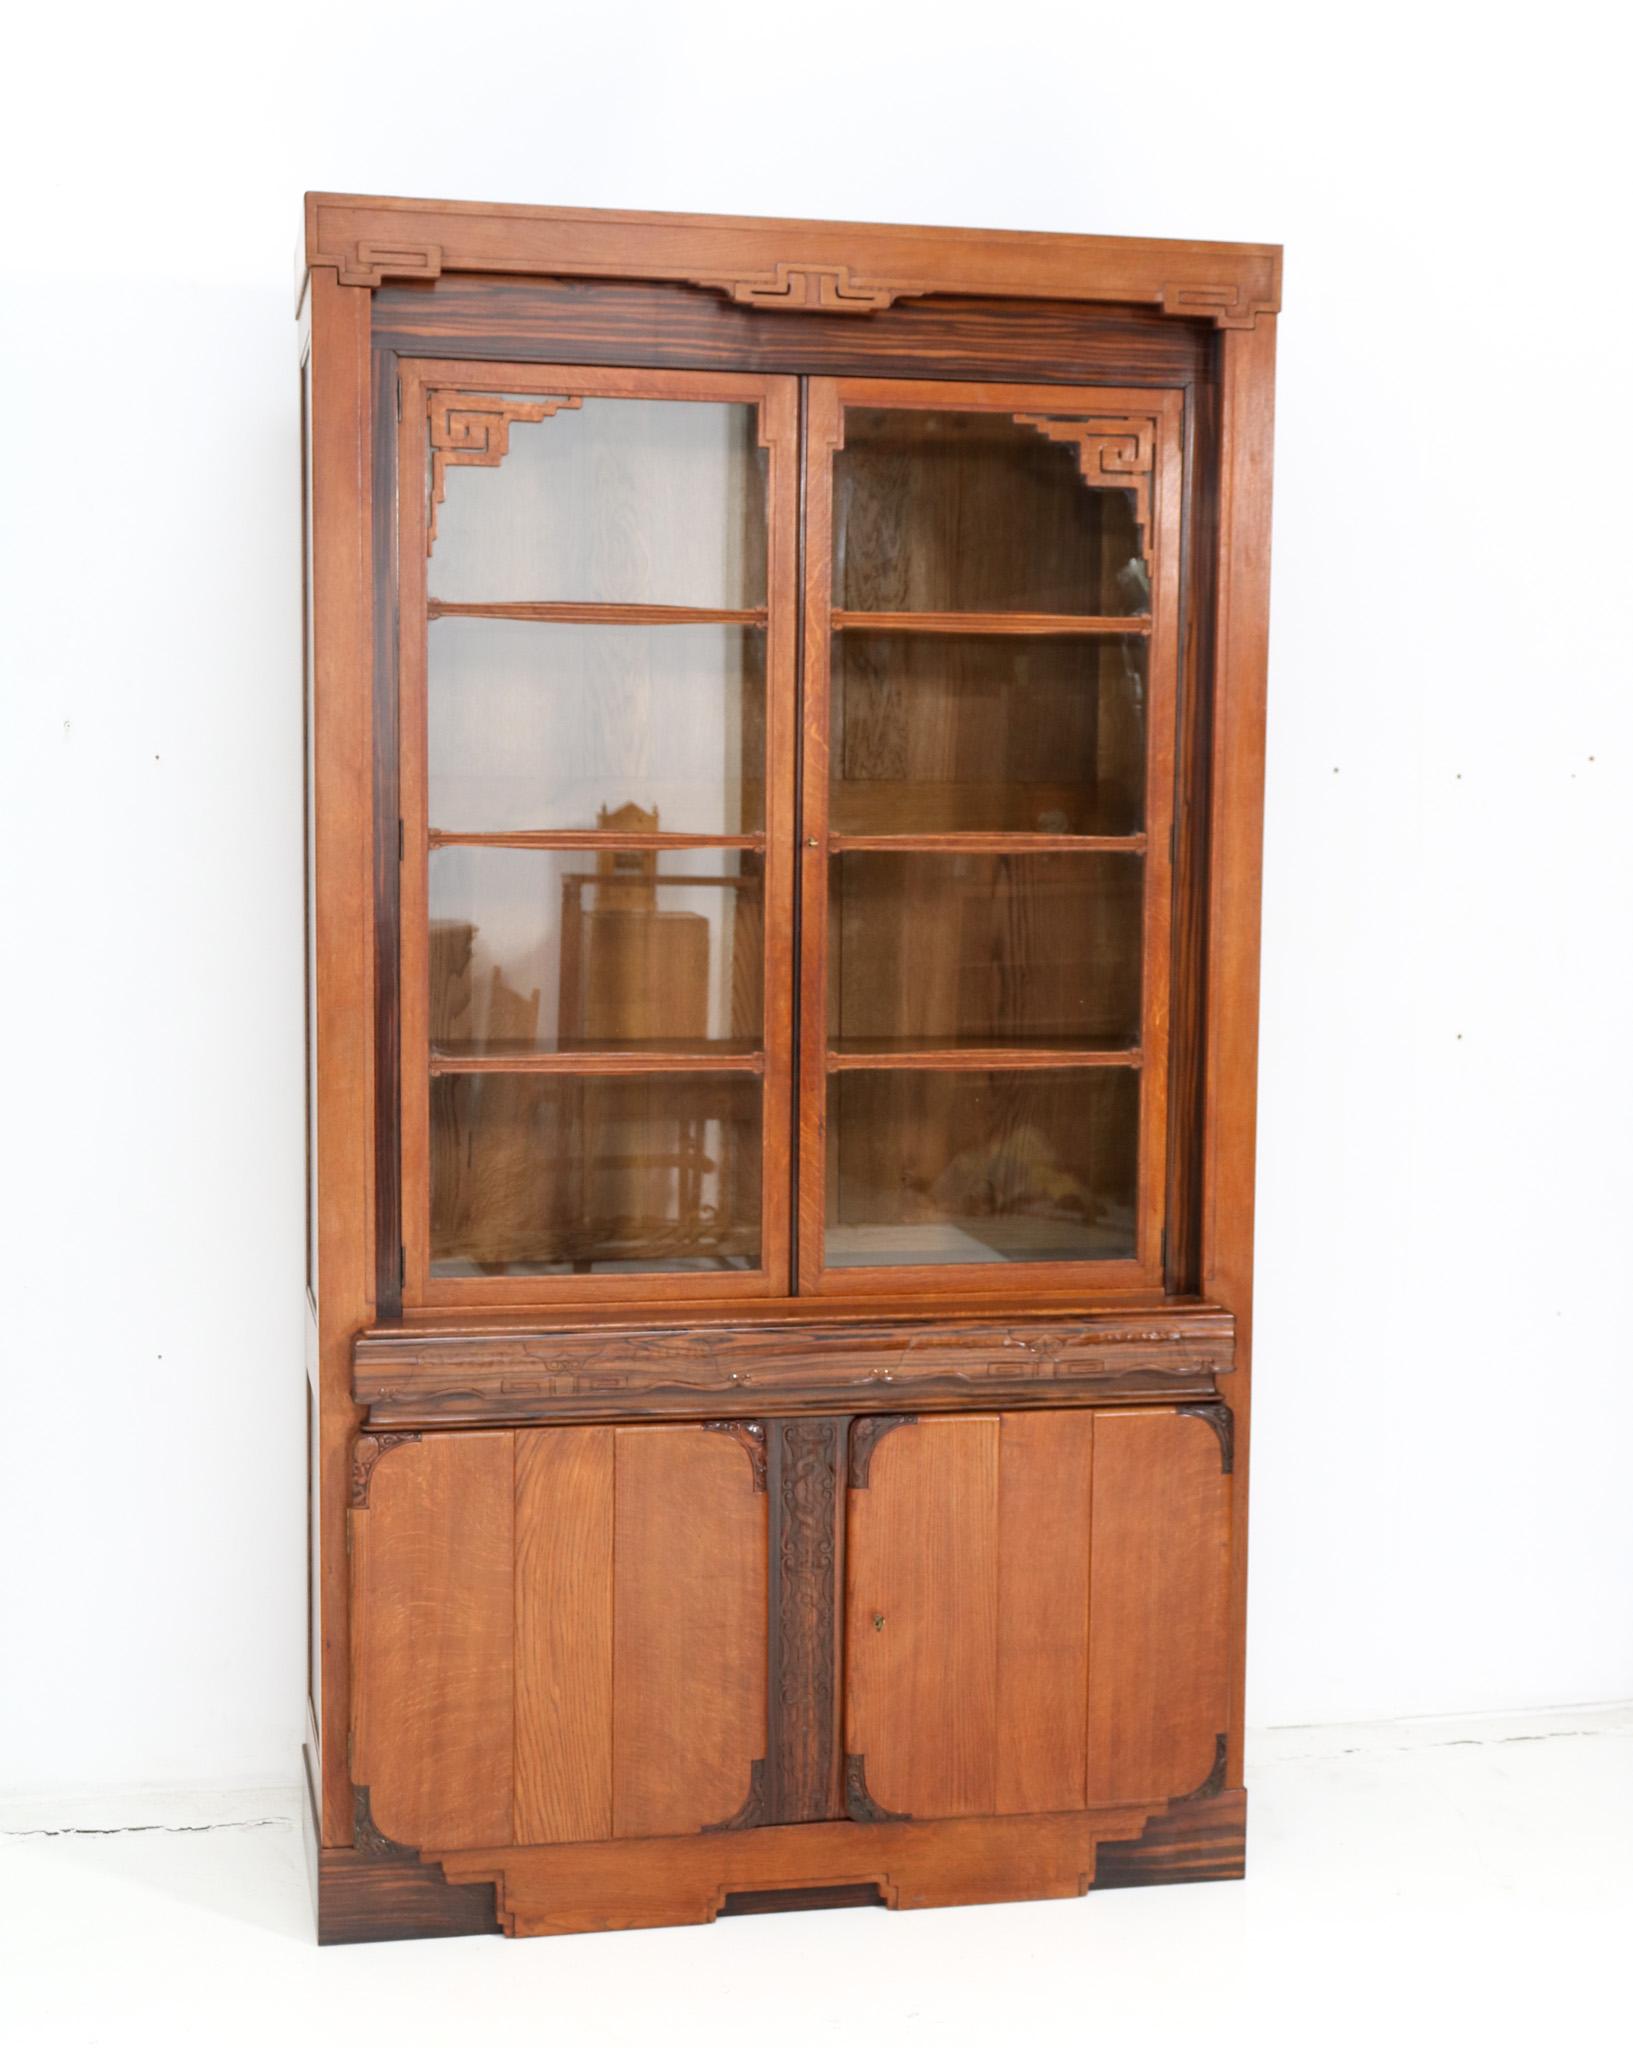 Magnificent and ultra rare Art Deco Amsterdamse School bookcase or vitrine.
Design by Napoleon le Grand for 't Modelhuis N. Le Grand Amsterdam.
Striking Dutch design from the 1920s.
Solid oak base with original hand carved decorative solid